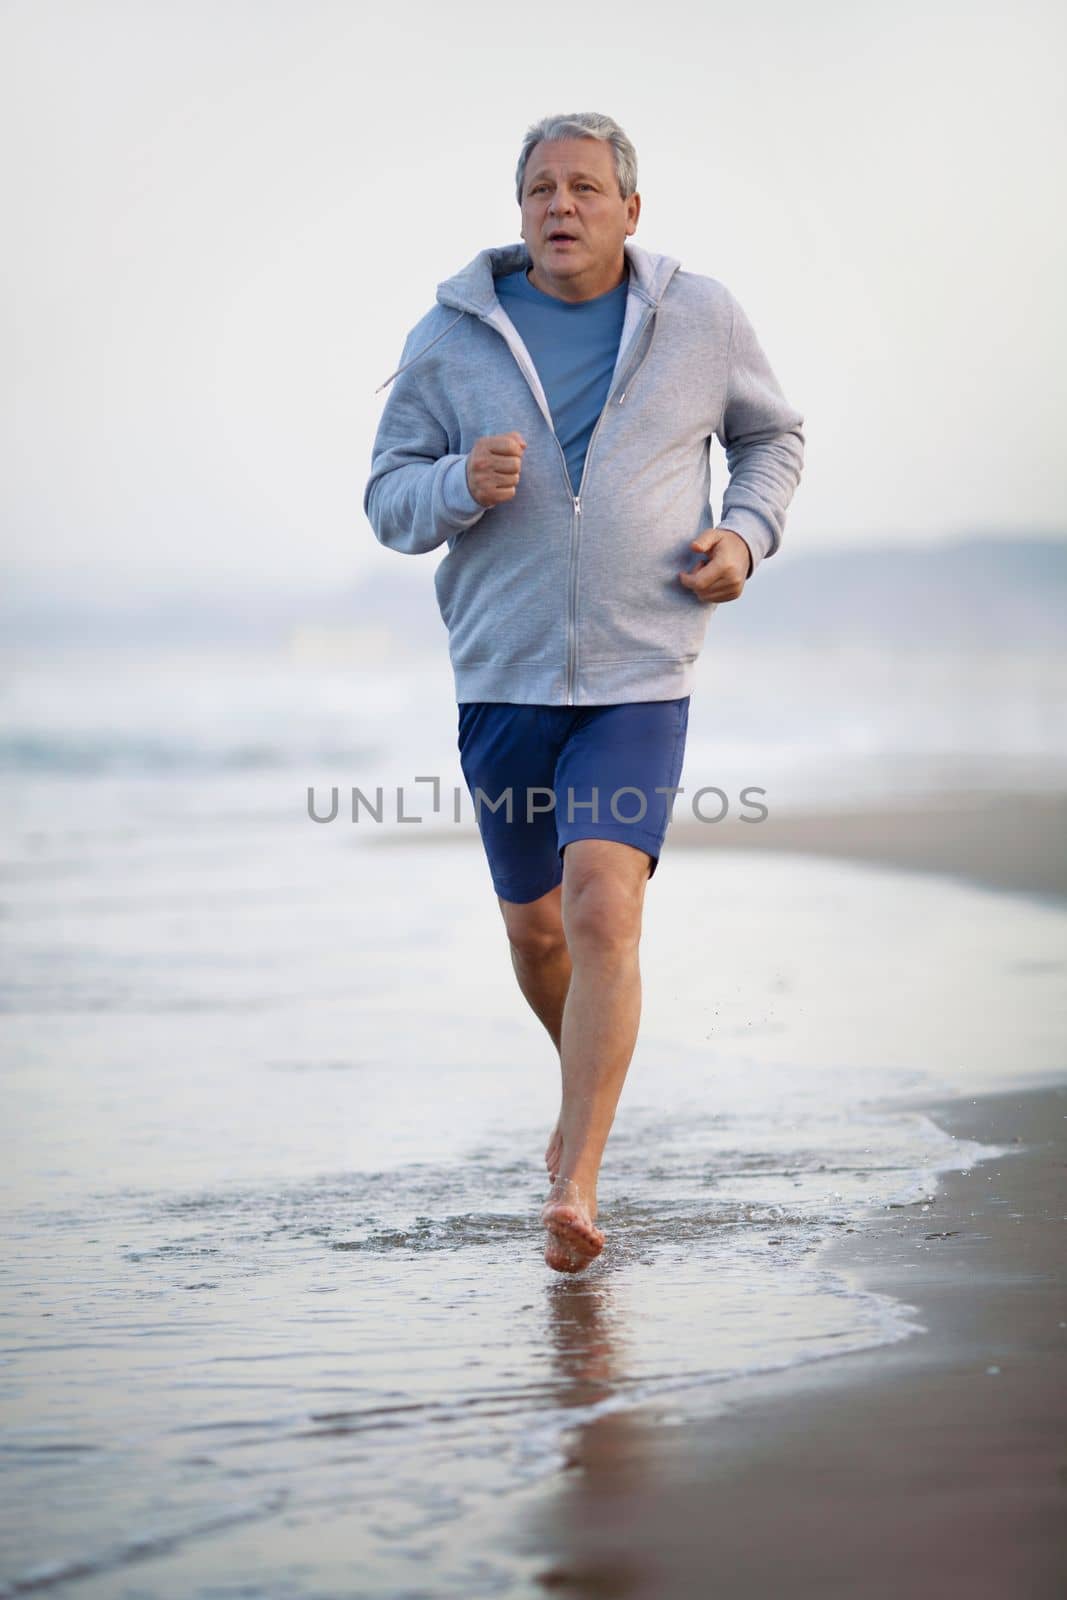 Barefoot senior man in shorts and hoodie jogging on the beach. Coastal sea waves washing his feet. Active and healthy lifestyle in retirement